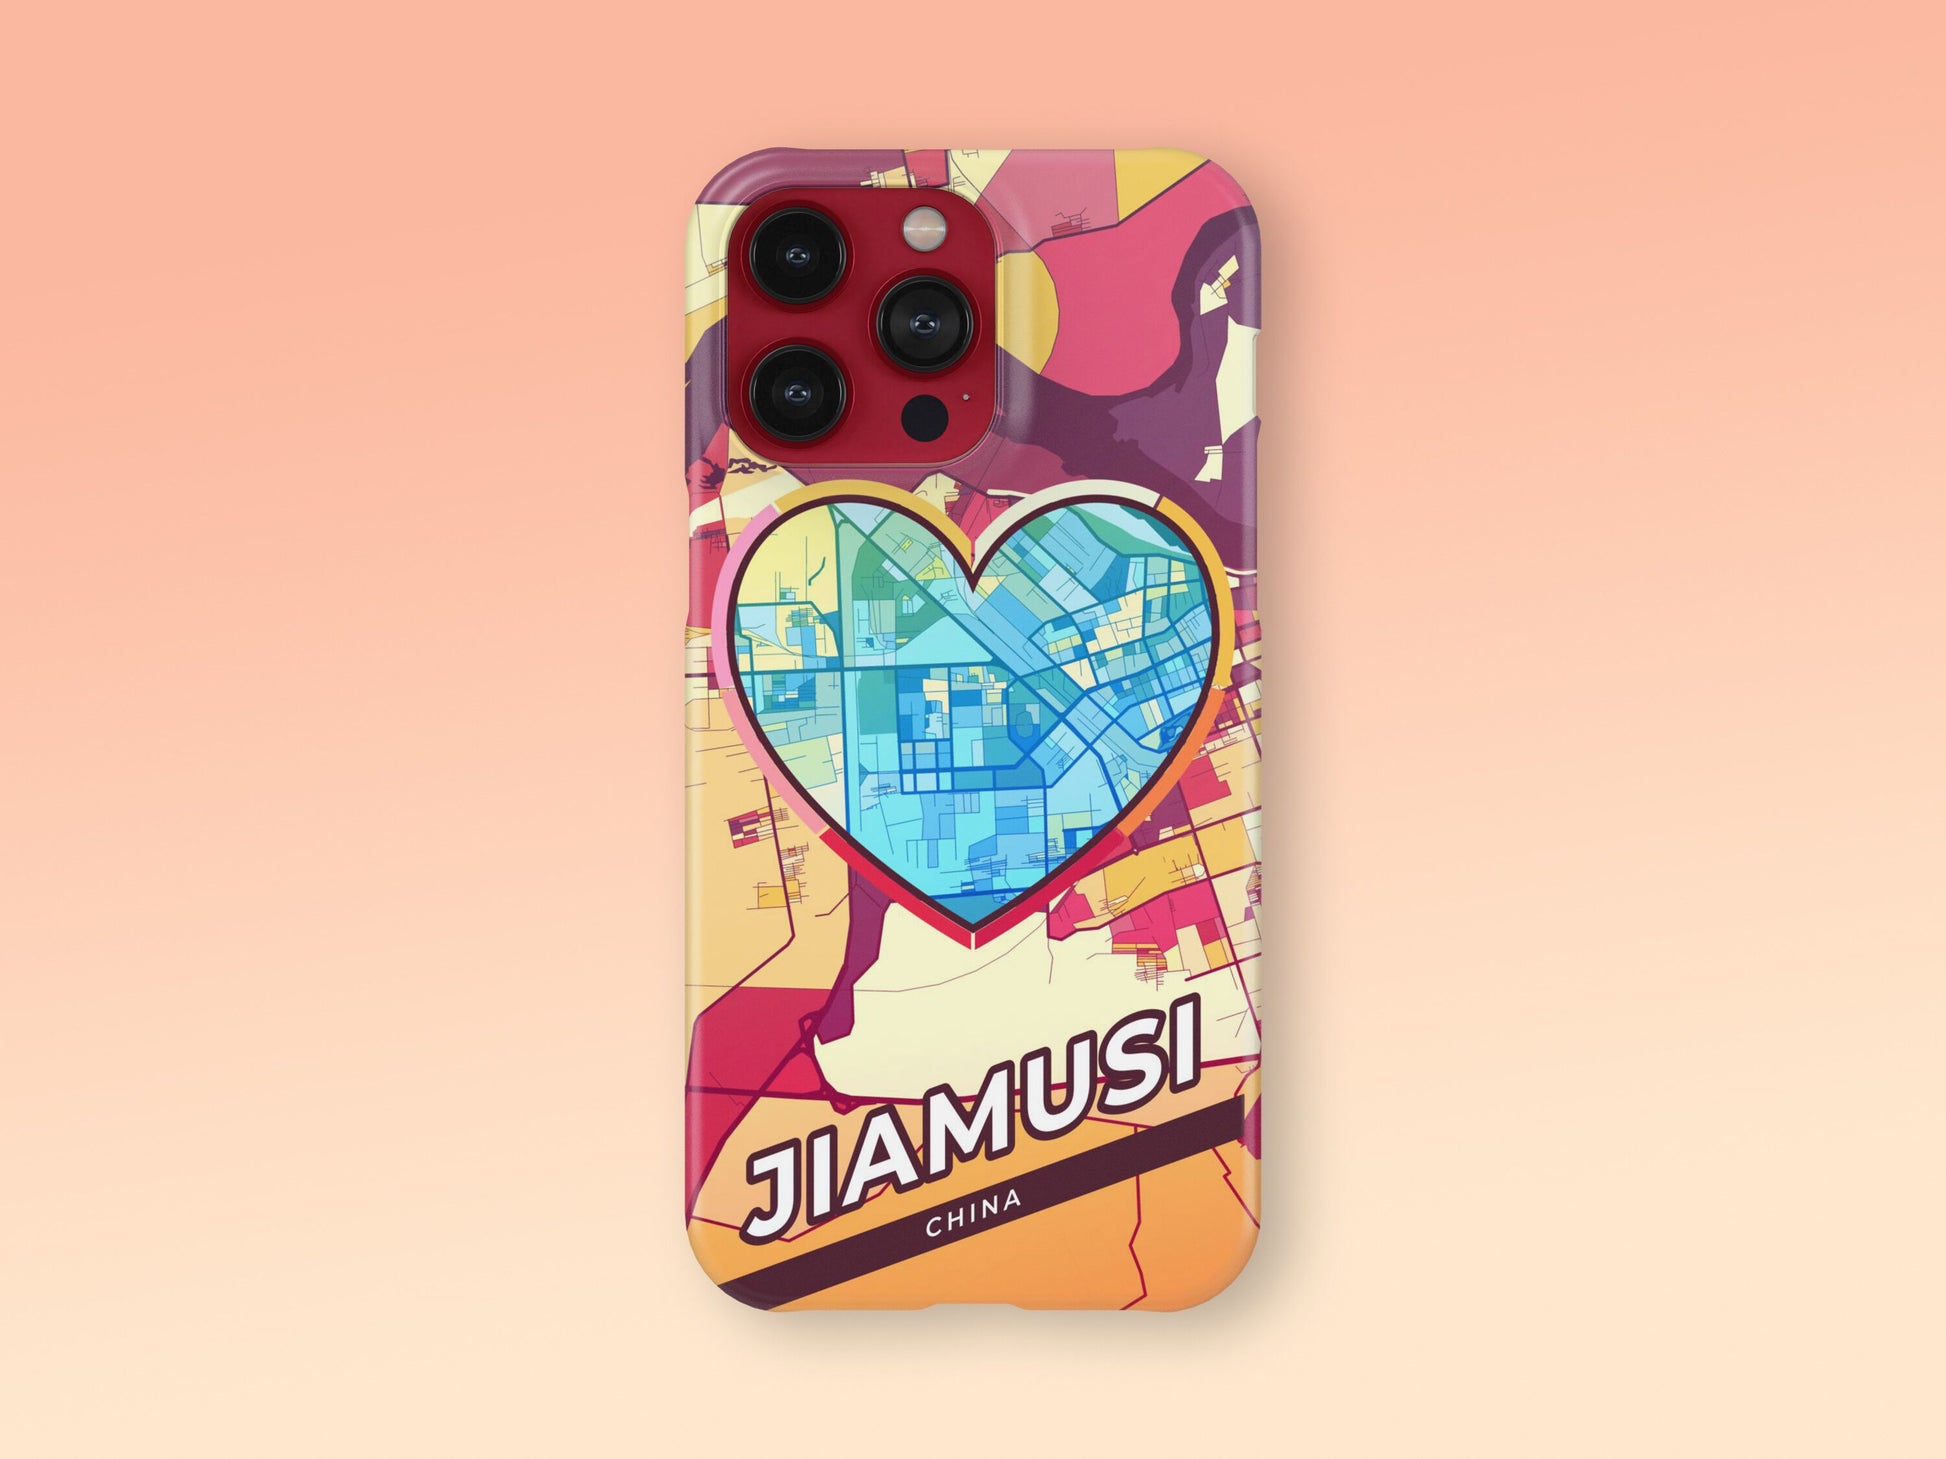 Jiamusi China slim phone case with colorful icon. Birthday, wedding or housewarming gift. Couple match cases. 2